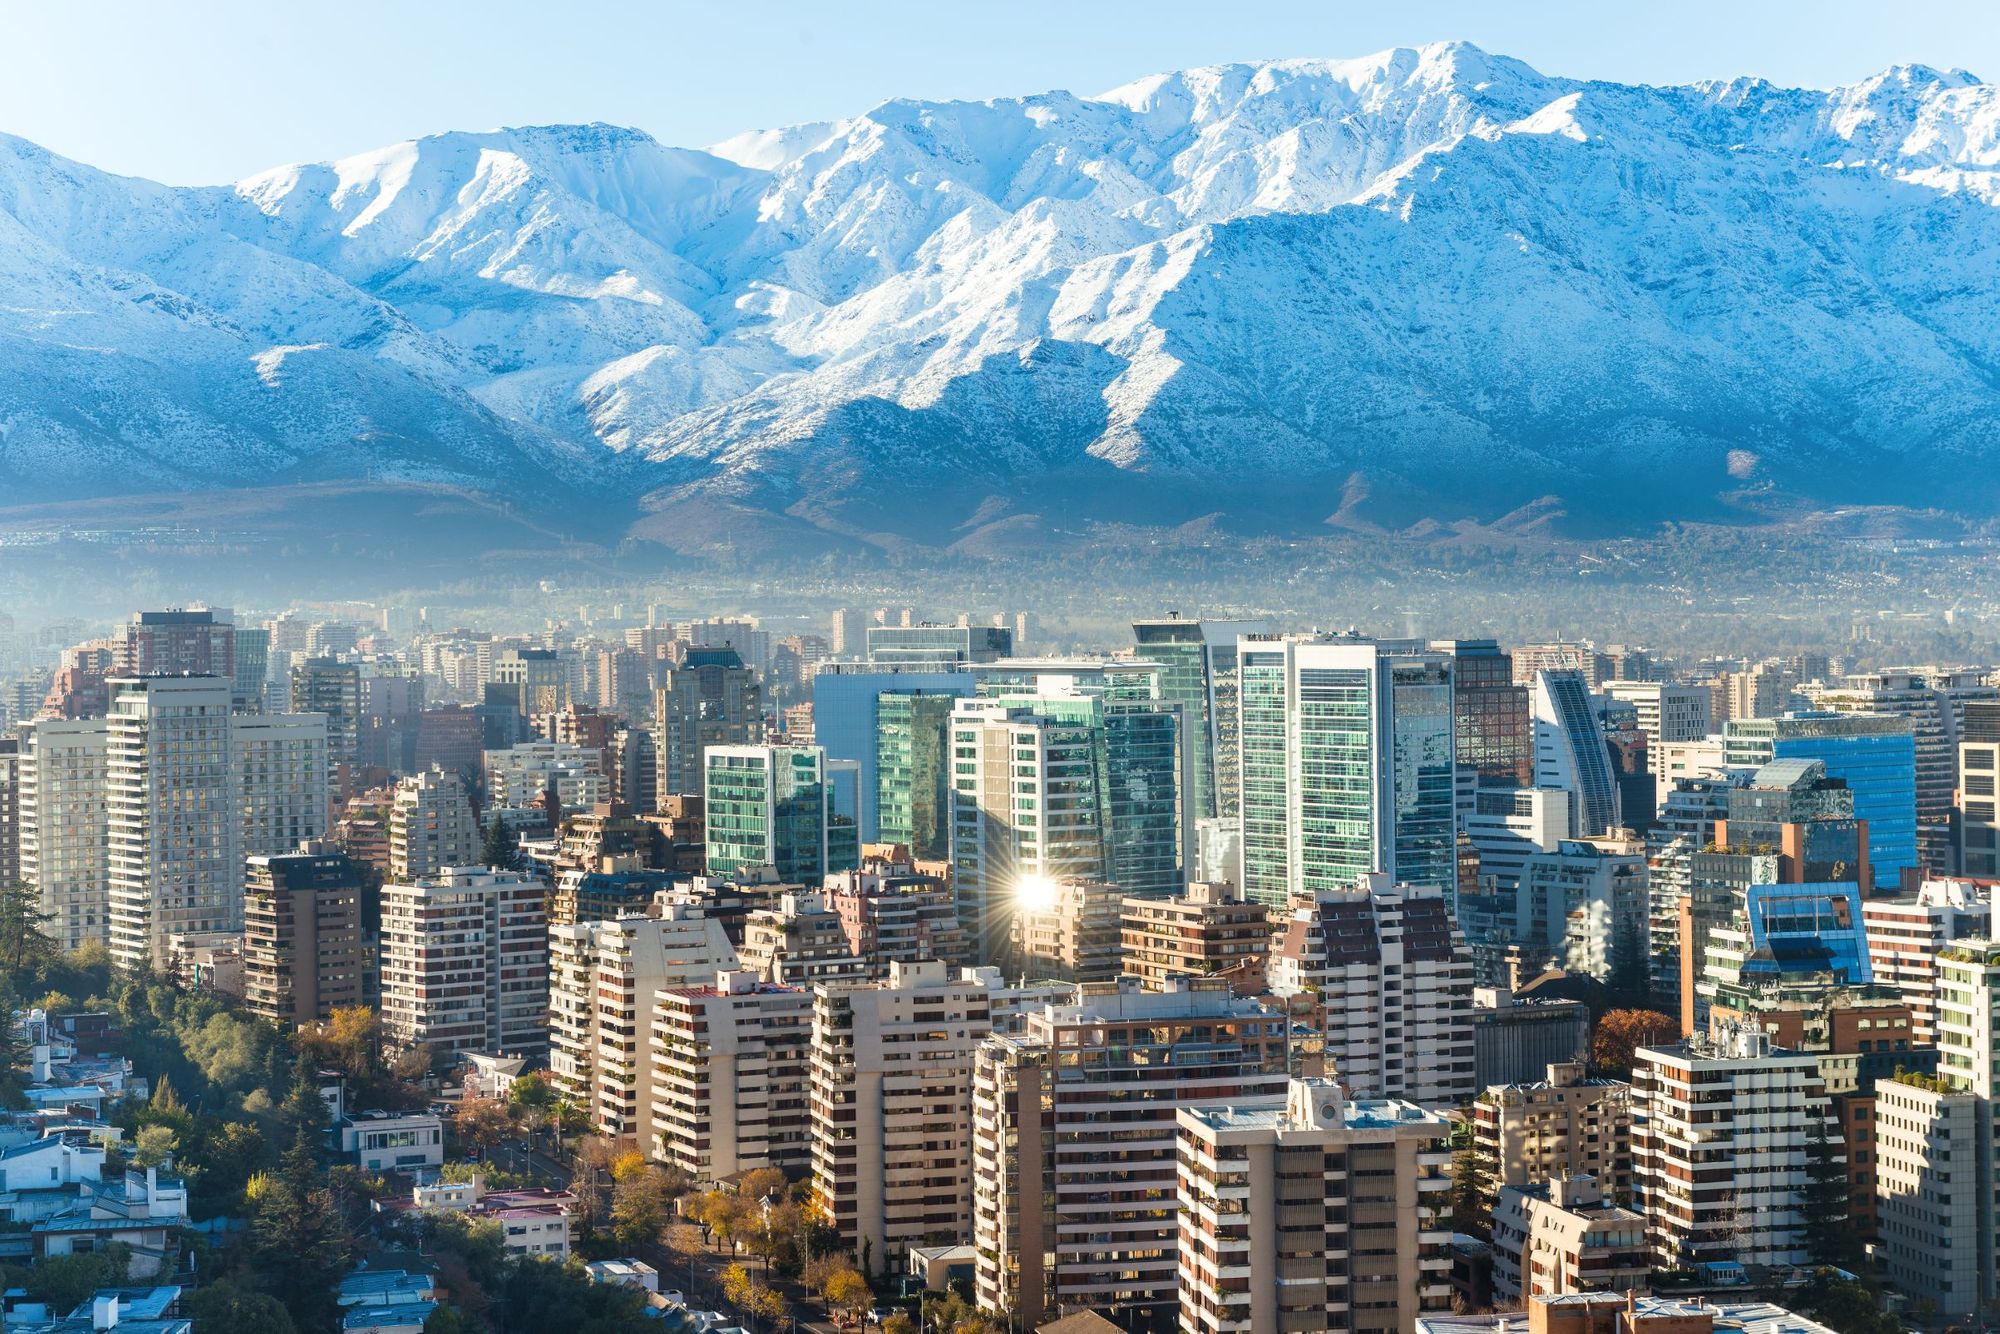 An aerial view of Santiago skyline, with the snow-blanketed might of the Andes Mountains behind. Photo: Getty